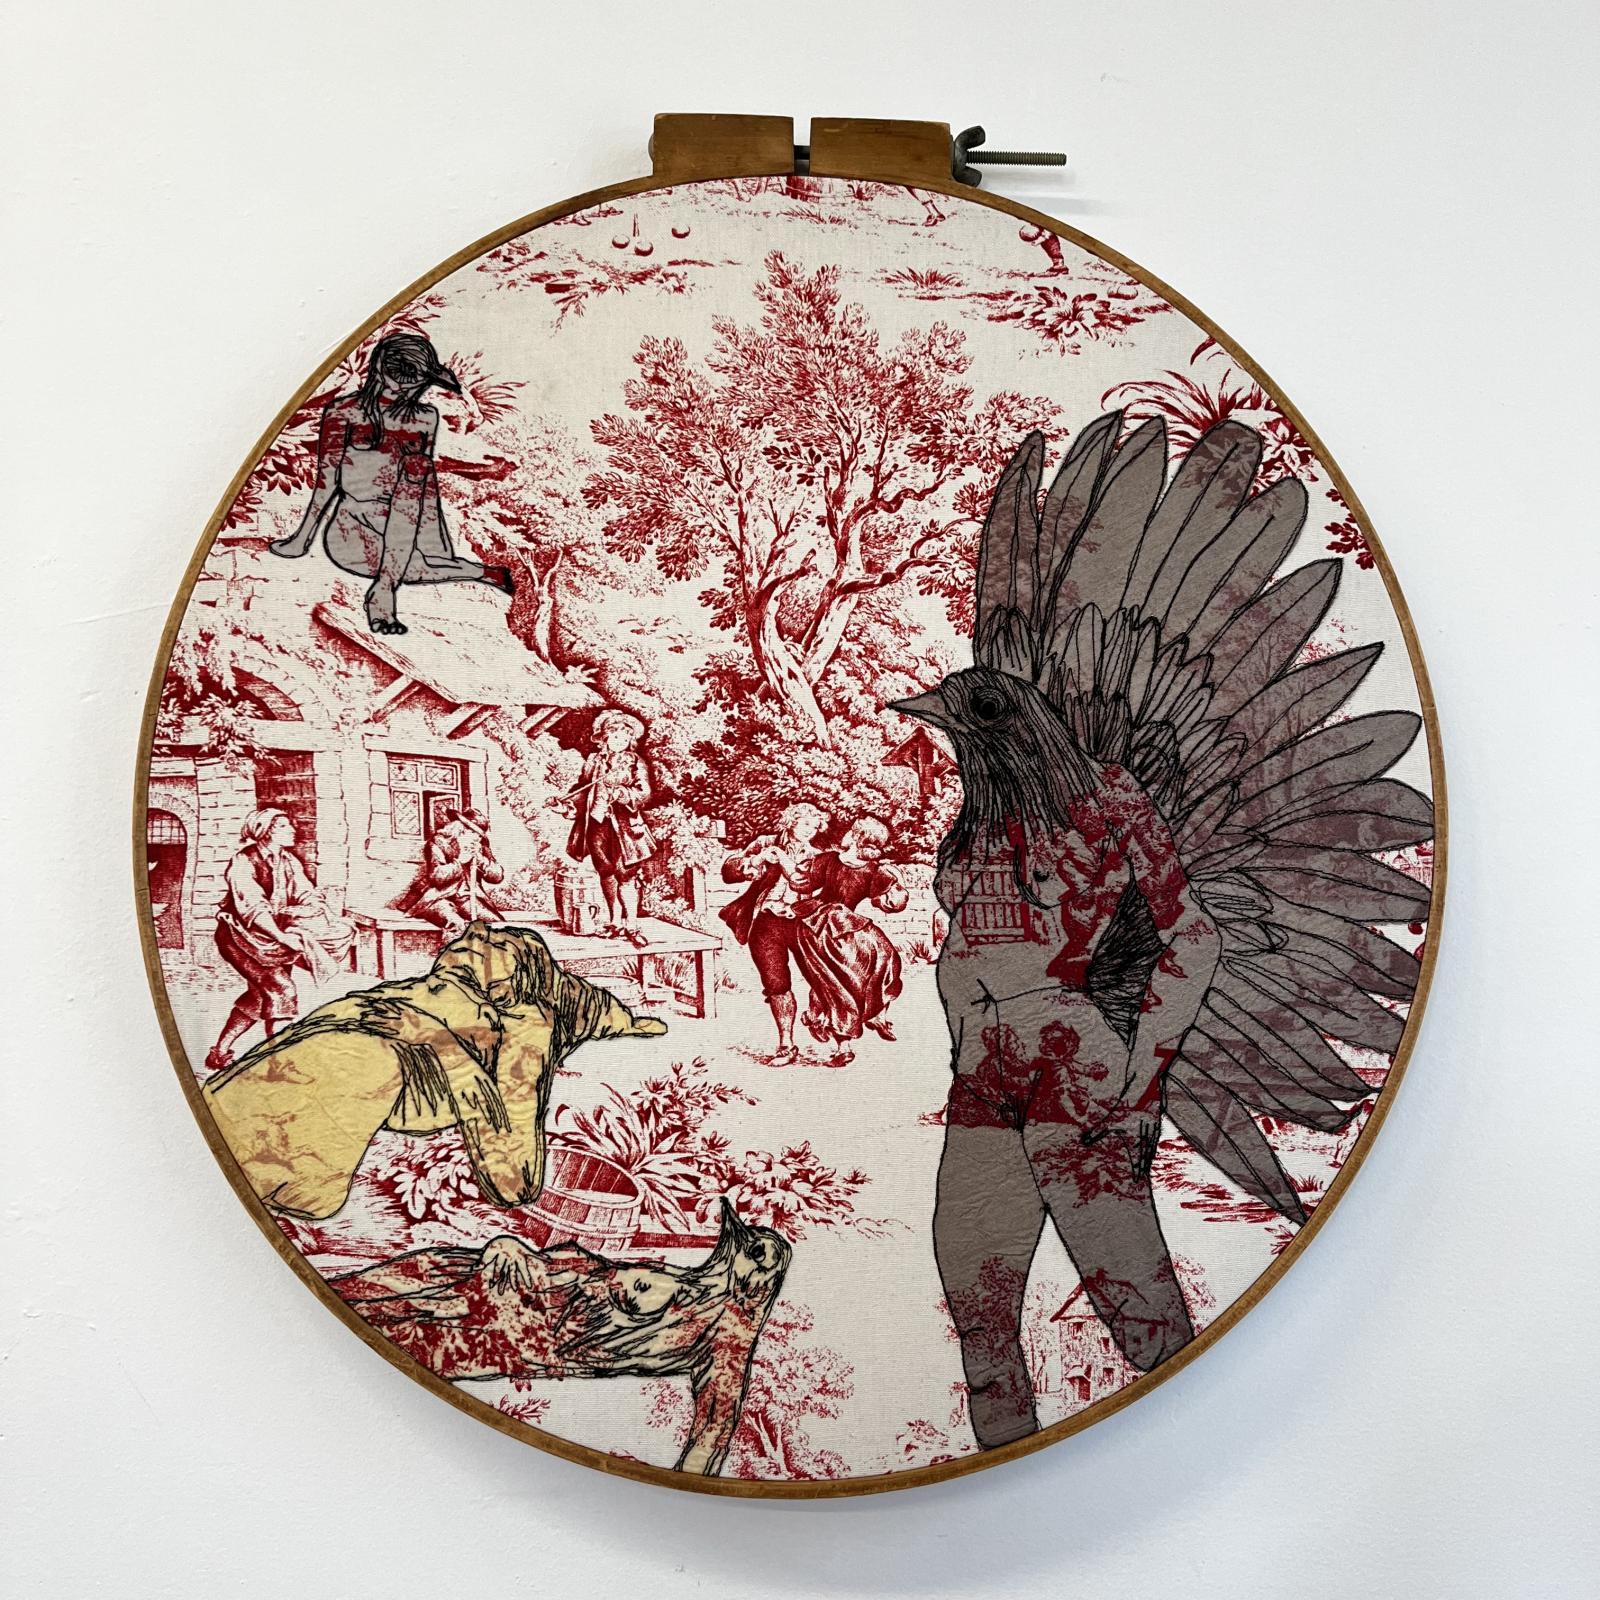 The Guardians, 2022, featured four figures that are freehand machine stitched. Three of the figures have bird heads and one gracious fish crow woman has wings. Hand embroidery has been used to emphasize the pattern from the narrative toile scene fabric to give these figures a powerful feeling of strength as well as transparency. Bird women are appliqued and reinforced stitched on decor fabric that is stretched and attached to a vintage wooden embroidery hoop measuring 23” X 23” X 1.5” . This piece was created in 2022.